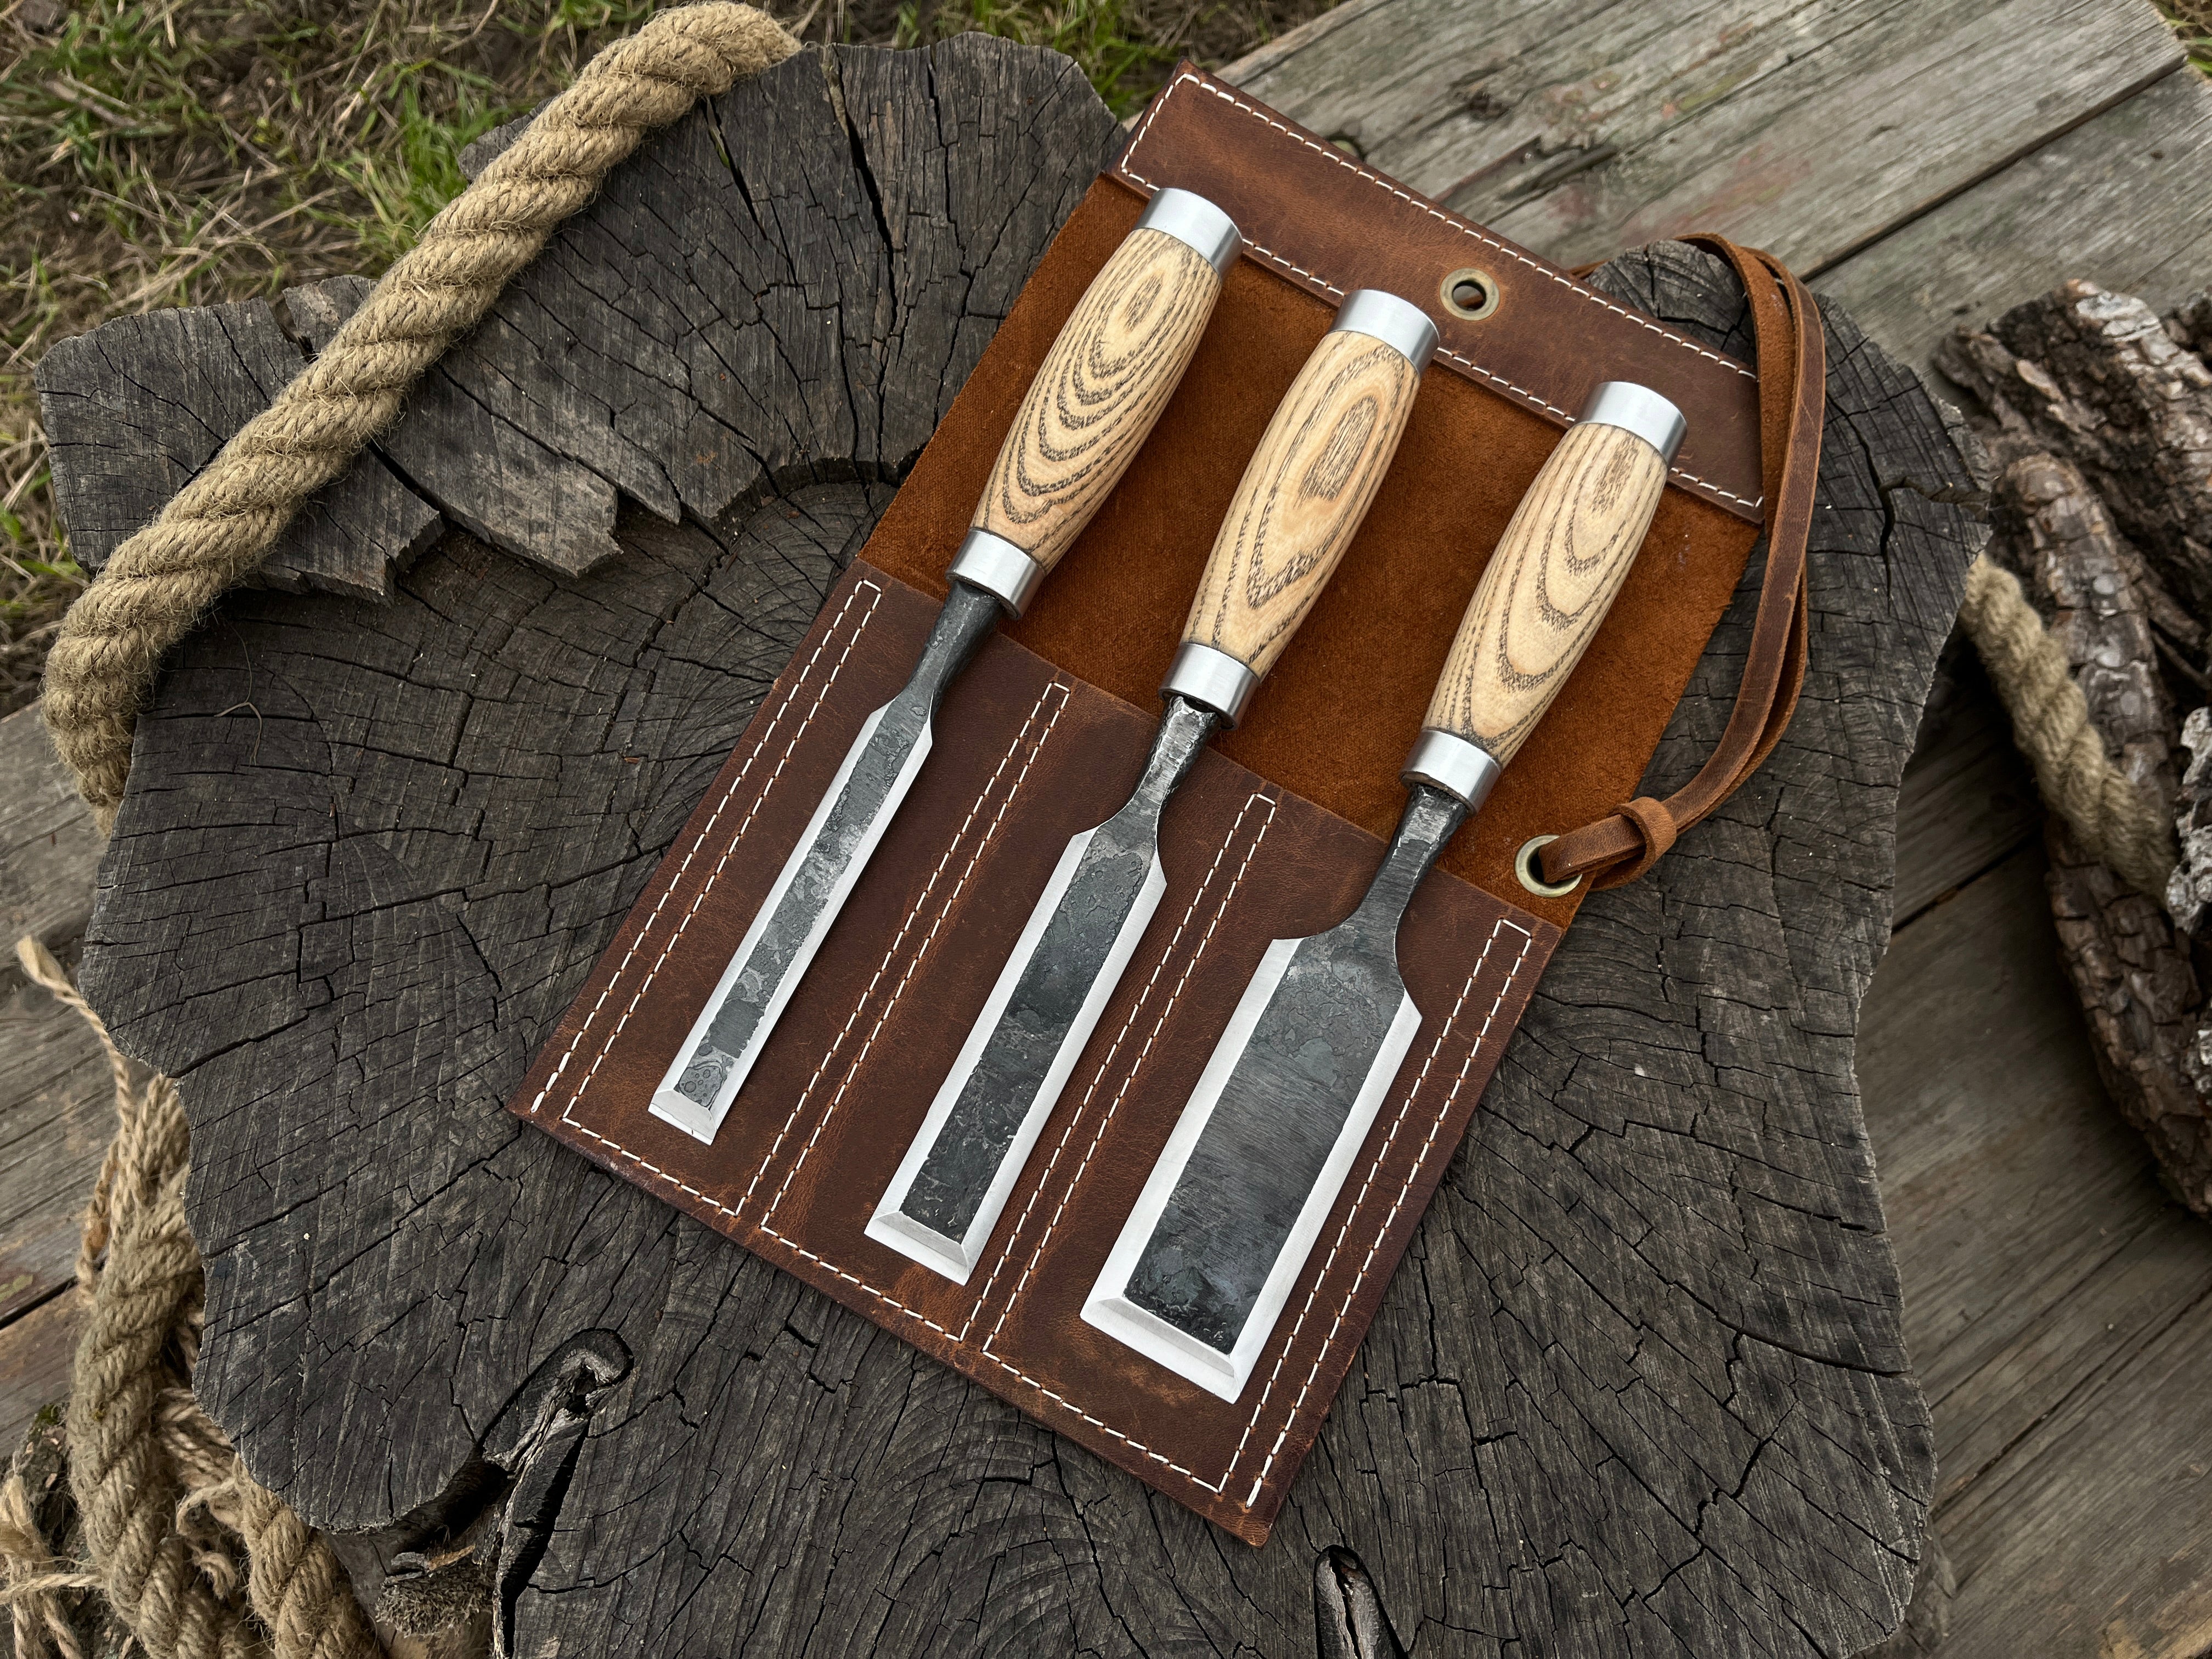 3-Piece Hand-Forged Wood Carving Chisels Set